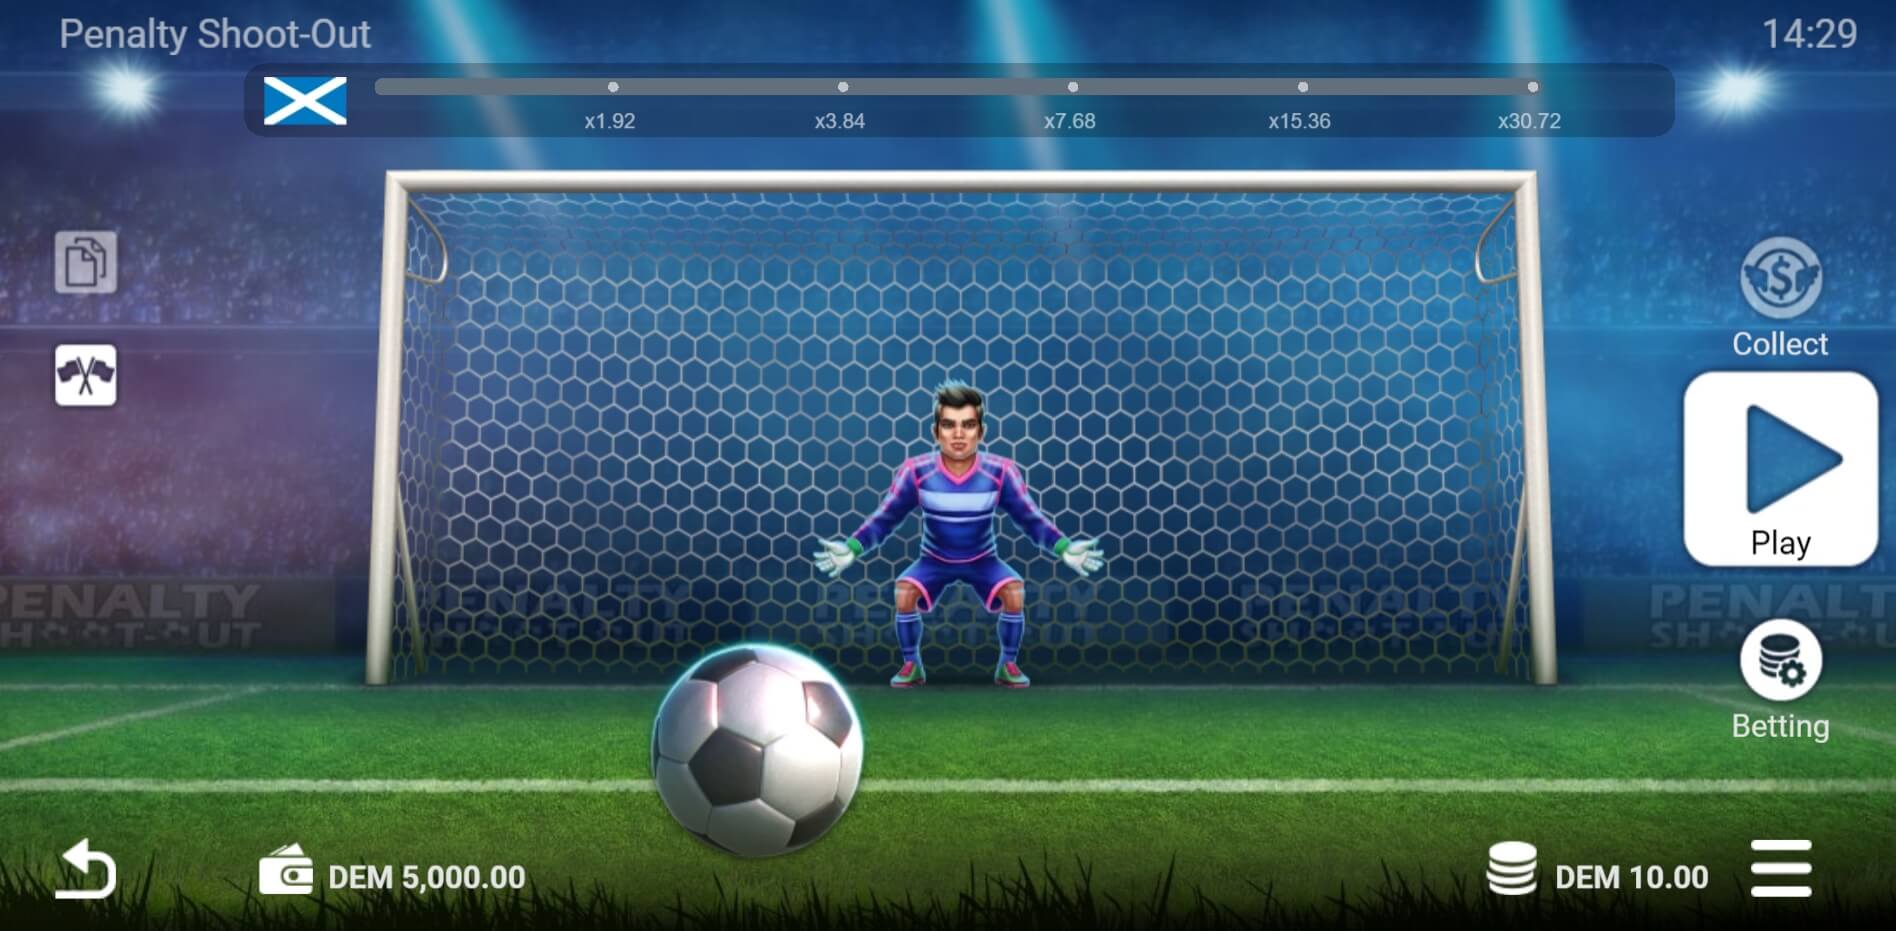 Penalty Shoot-out Evoplay superslot เครดิตฟรี 50